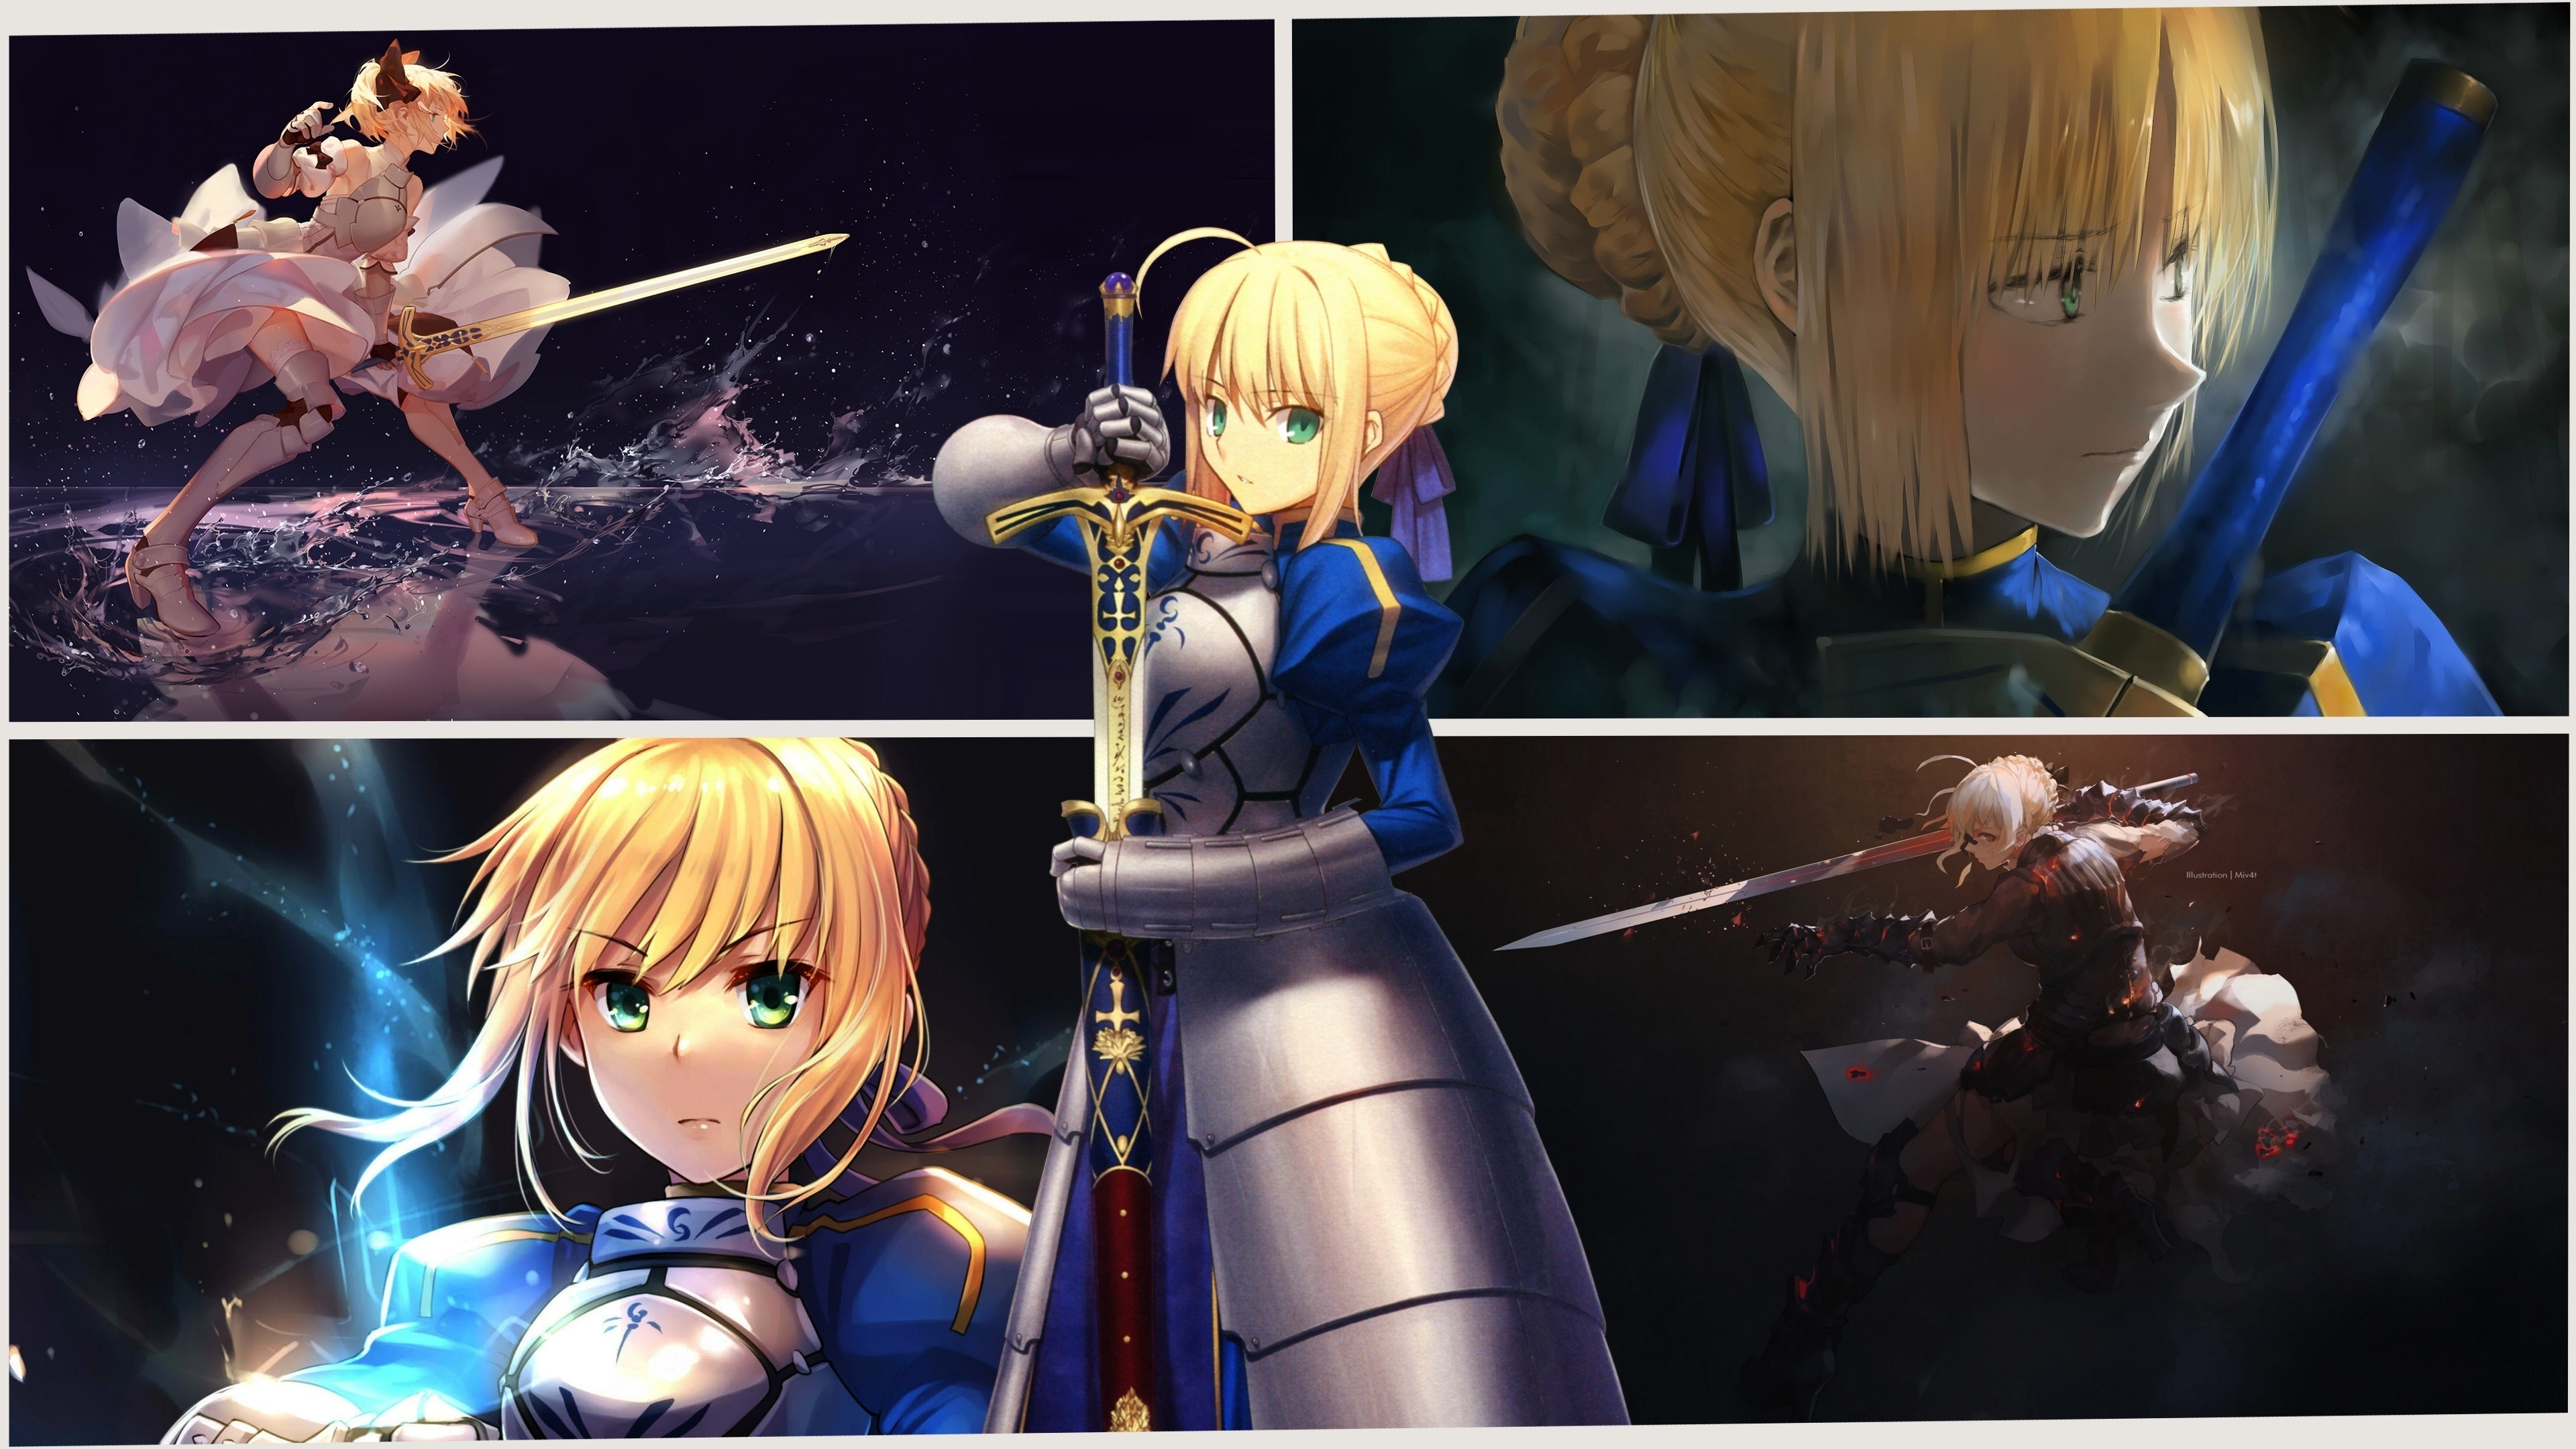 Download 3840x2400 Wallpaper Collage Saber Alter Angry Anime